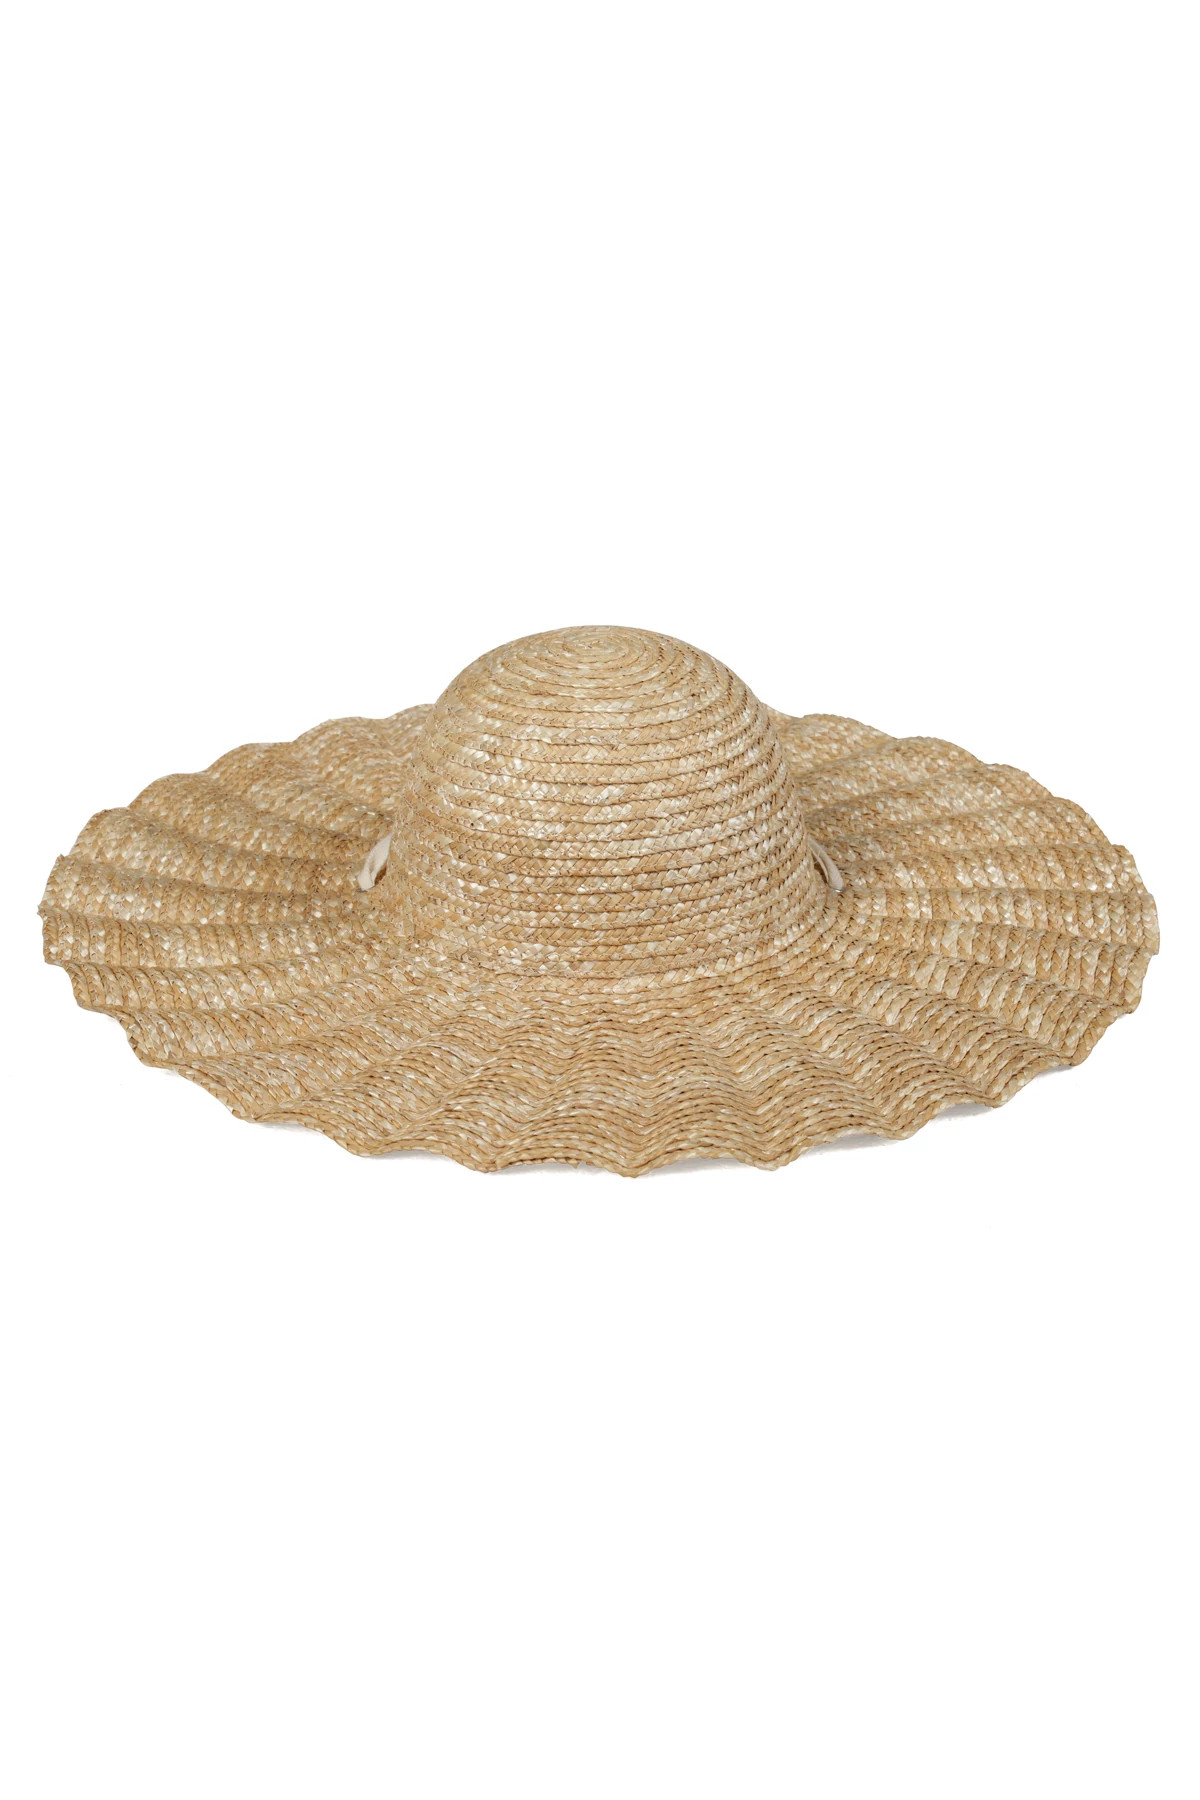 NATURAL Scalloped Dolce Sun Hat image number 2